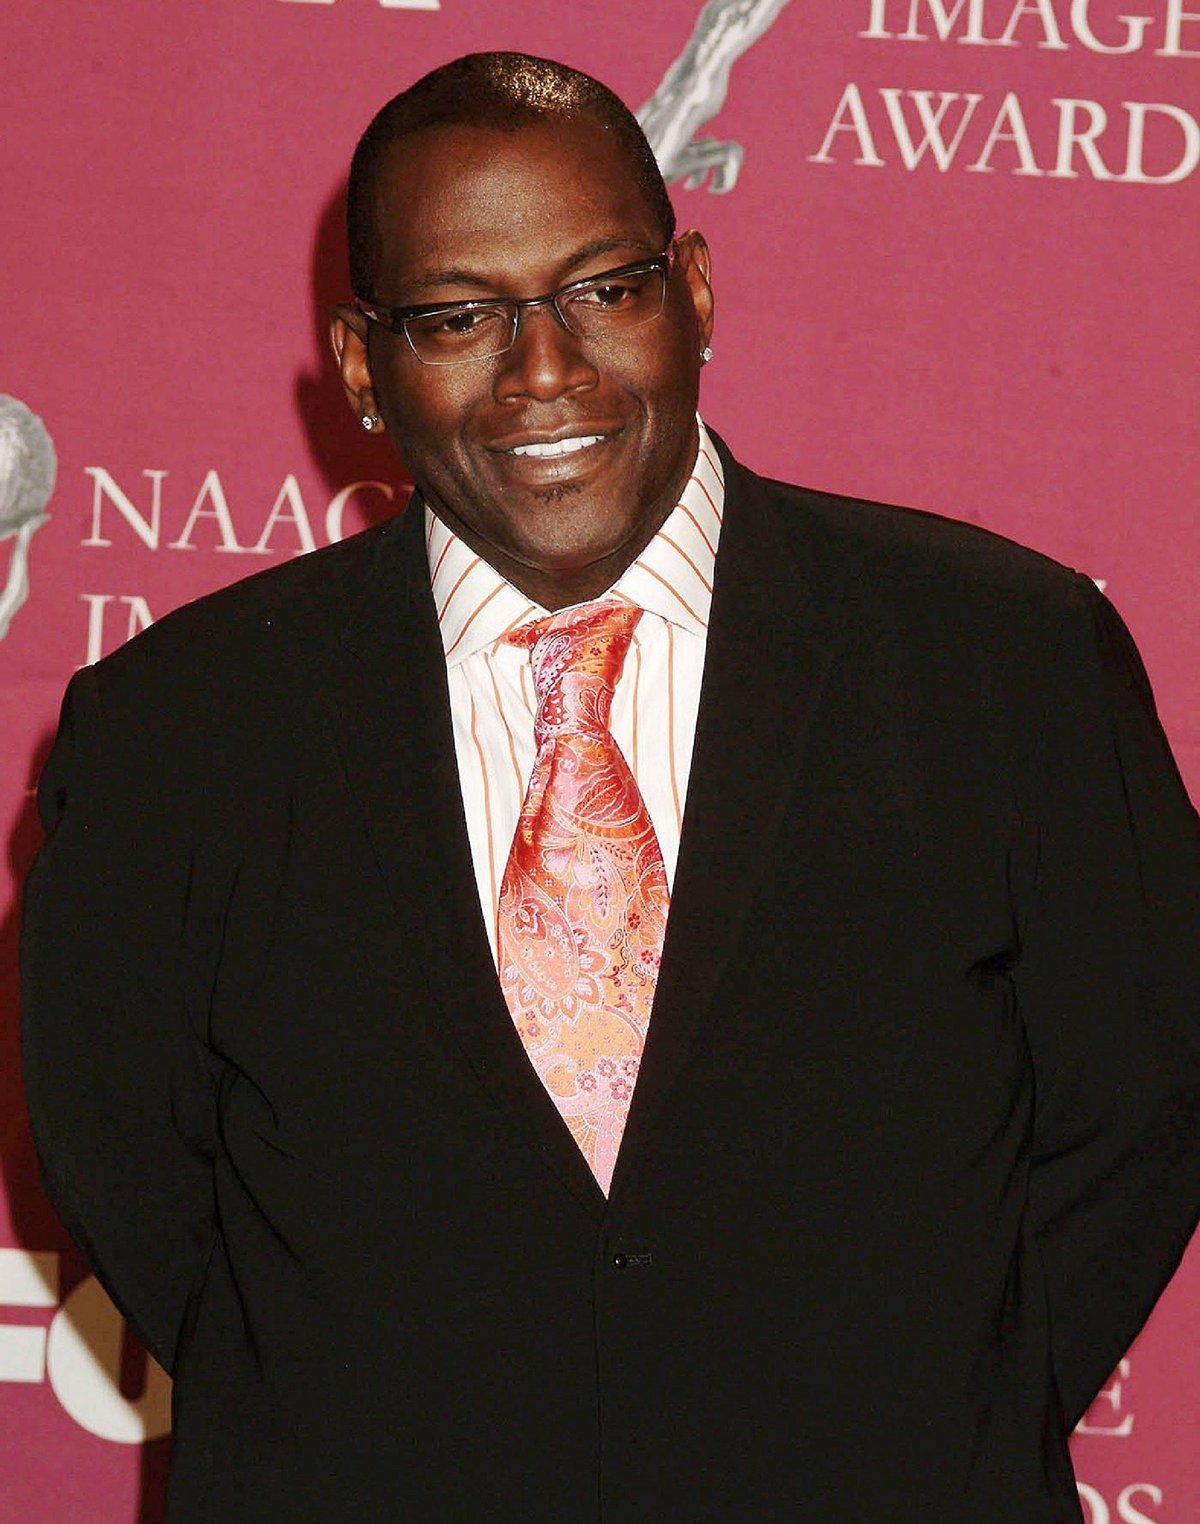 Randy Jackson had gastric bypass surgery in 2003 and his total weight loss is about 120 pounds